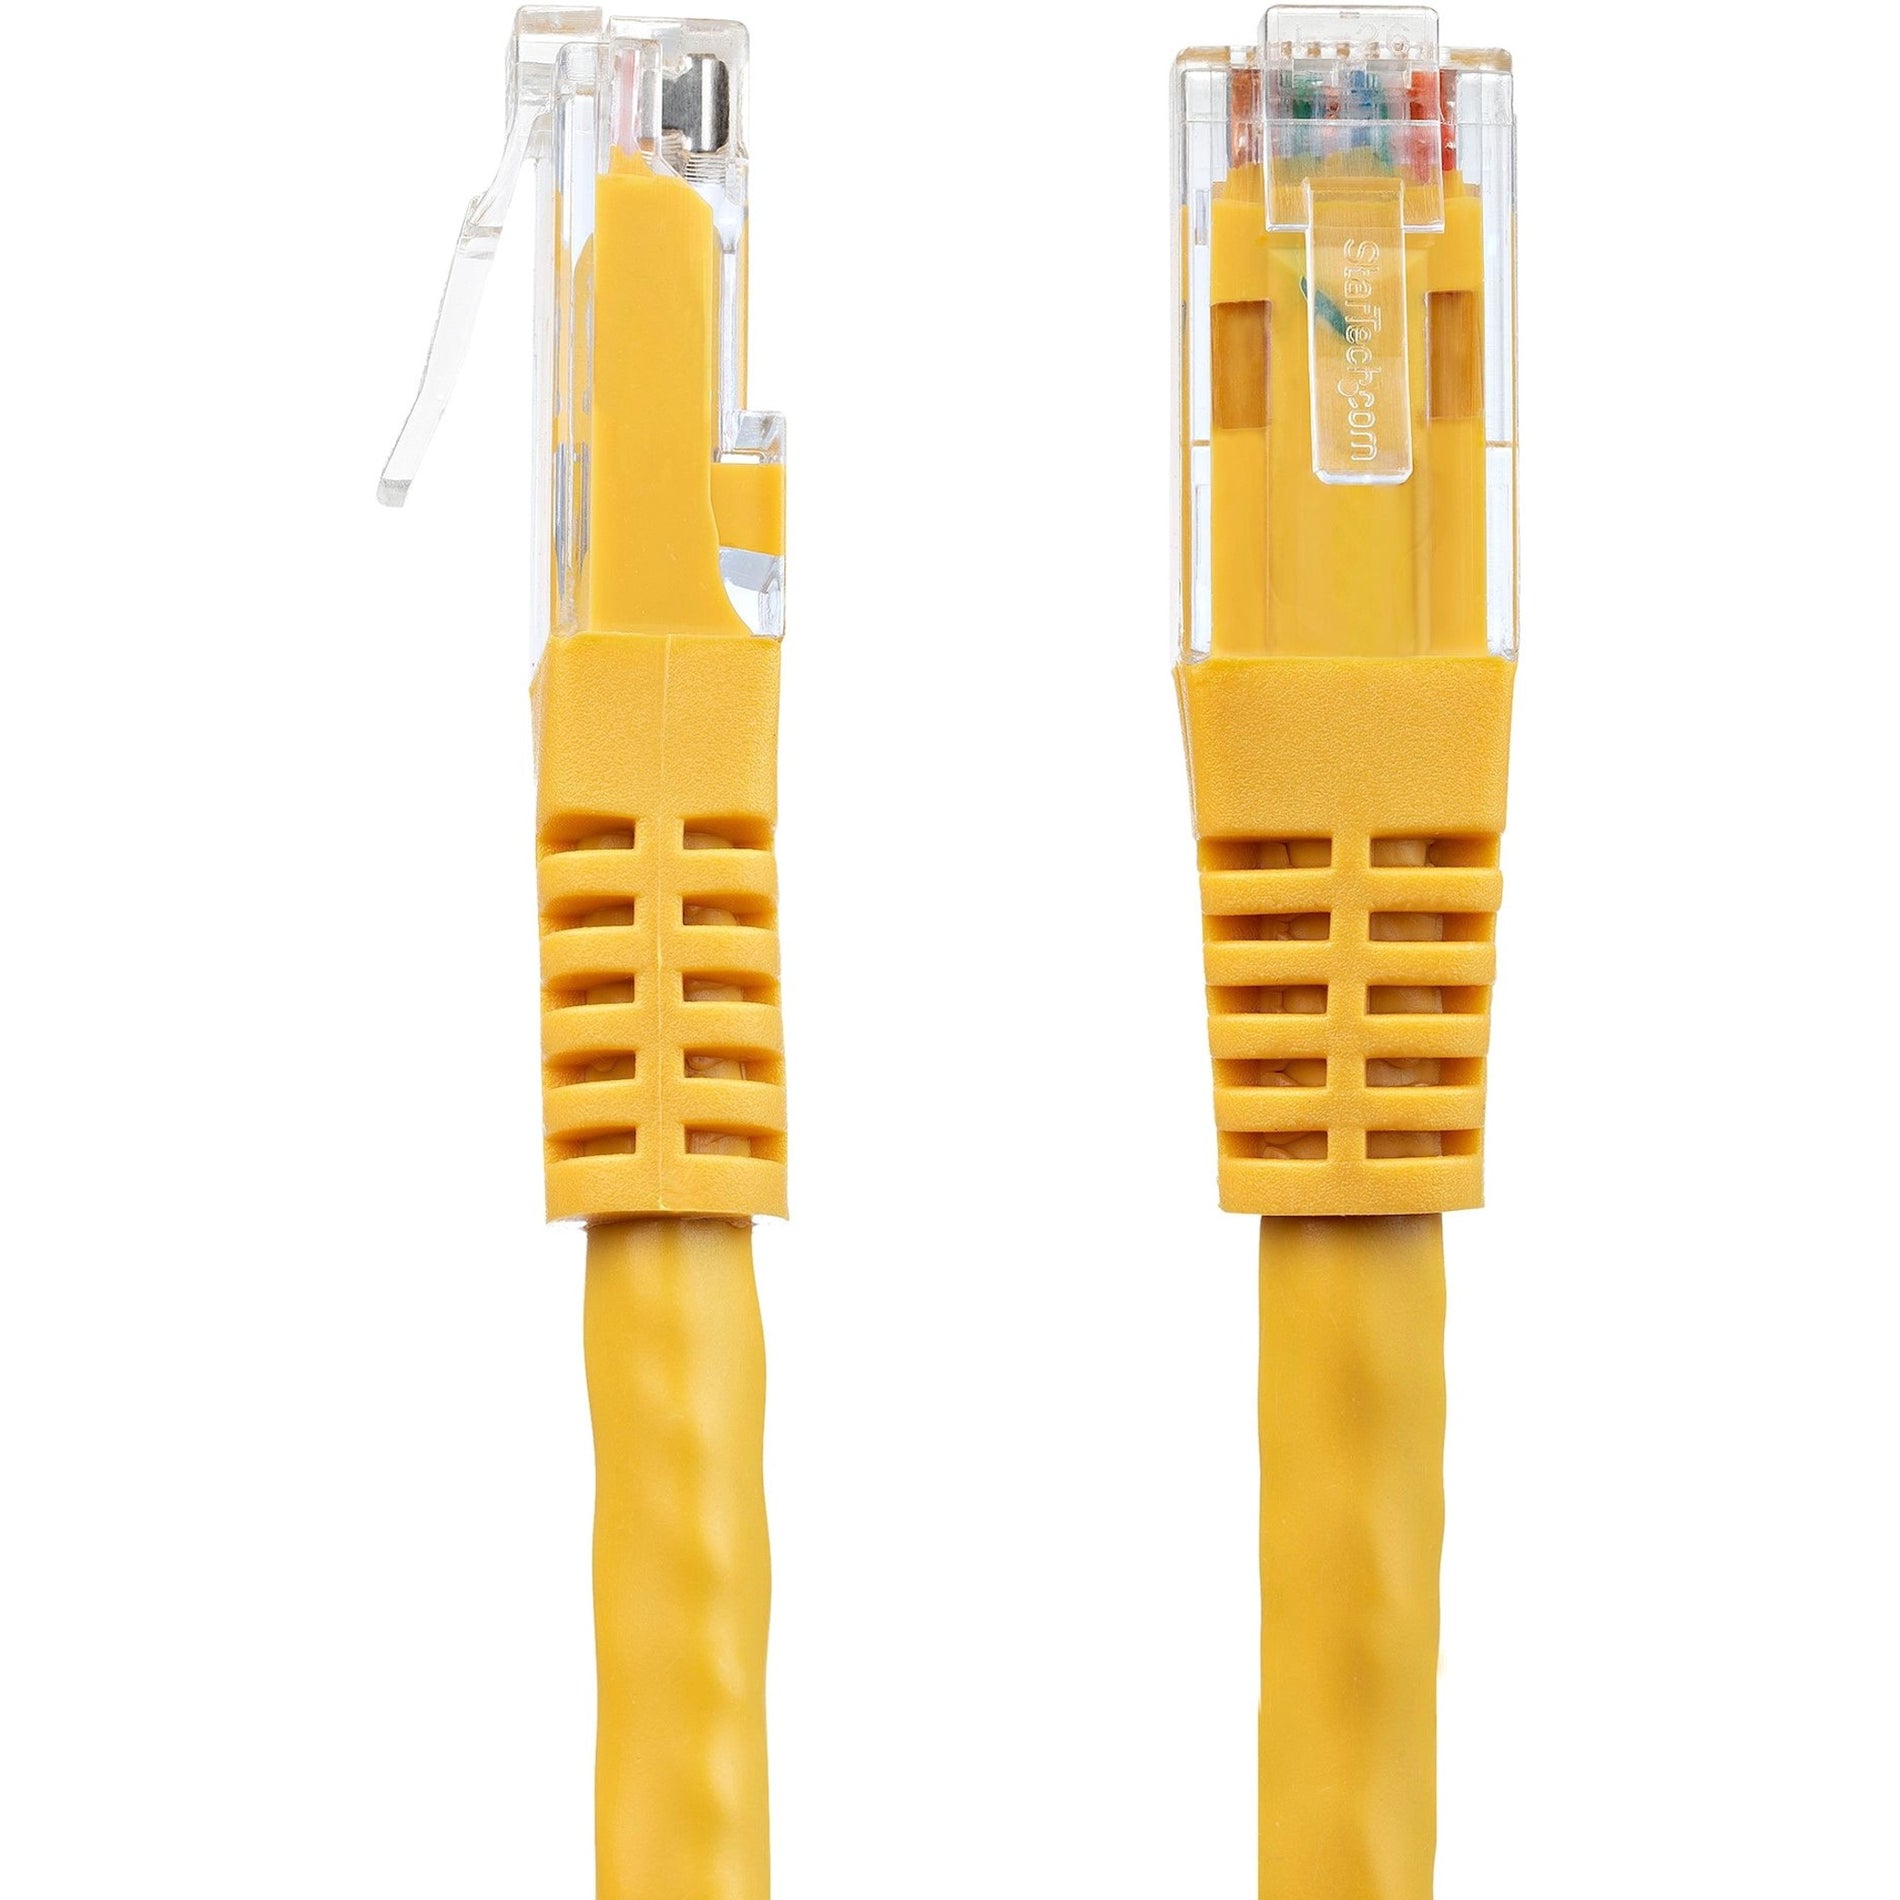 StarTech.com C6PATCH35YL 35ft Yellow Cat6 UTP Patch Cable ETL Verified, Fray Resistant, Molded, PoE, Strain Relief, Damage Resistant, Corrosion Resistant, Rust Resistant, Bend Resistant, Stranded, PoE++, Snagless, 10 Gbit/s